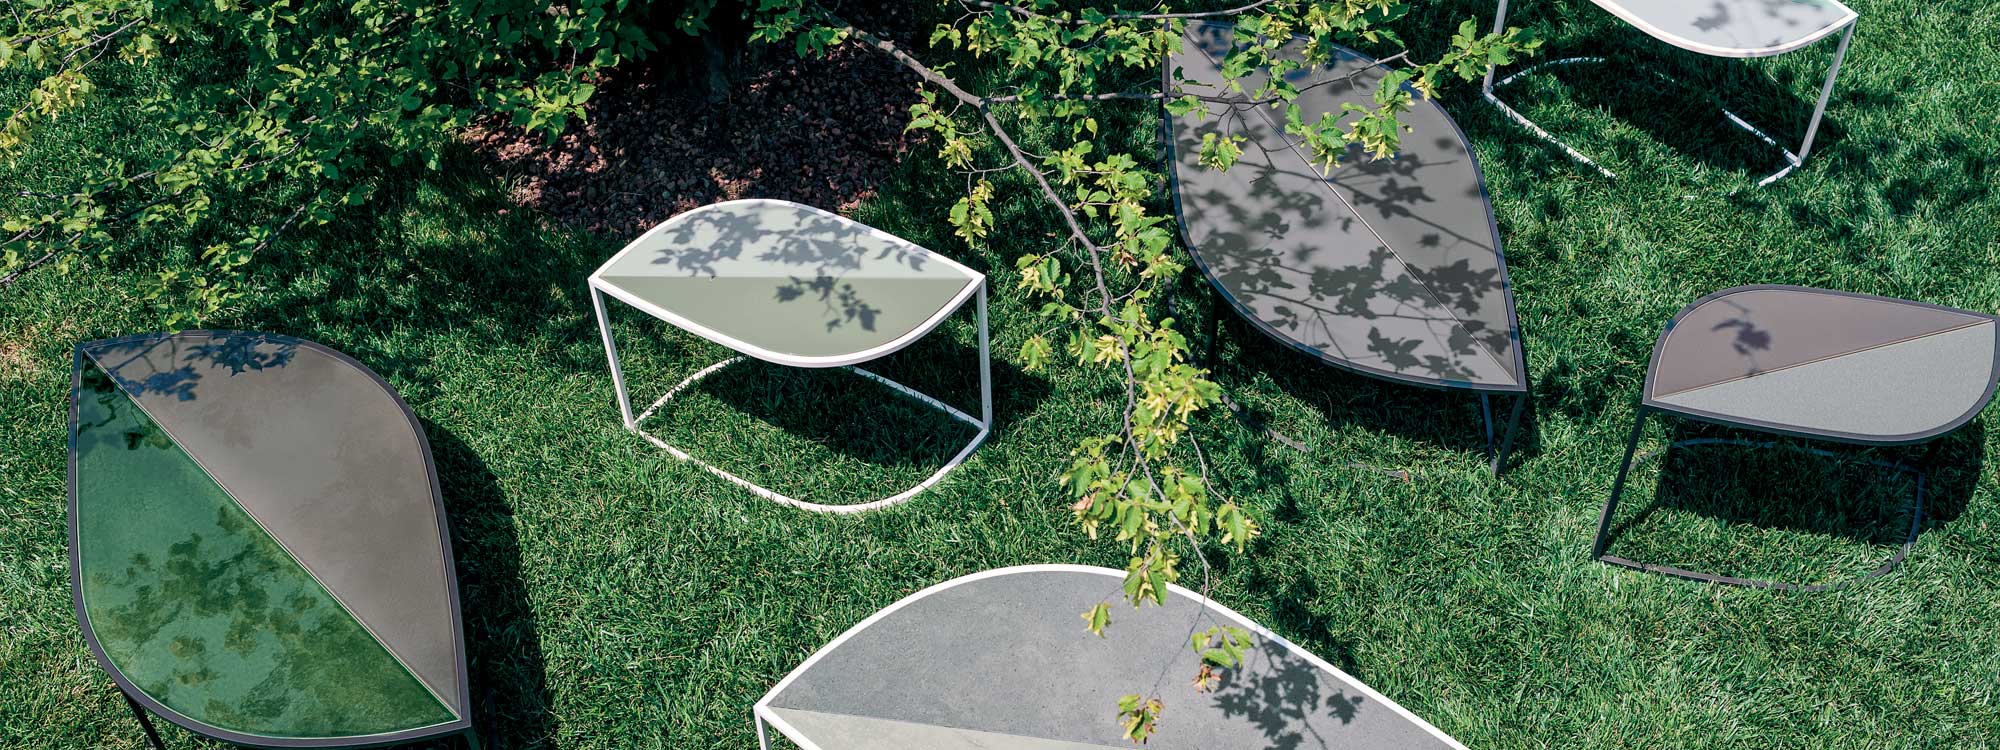 Image of different sizes and color finishes of RODA Leaf garden side tables shown on grassy lawn beneath canopy of tree.